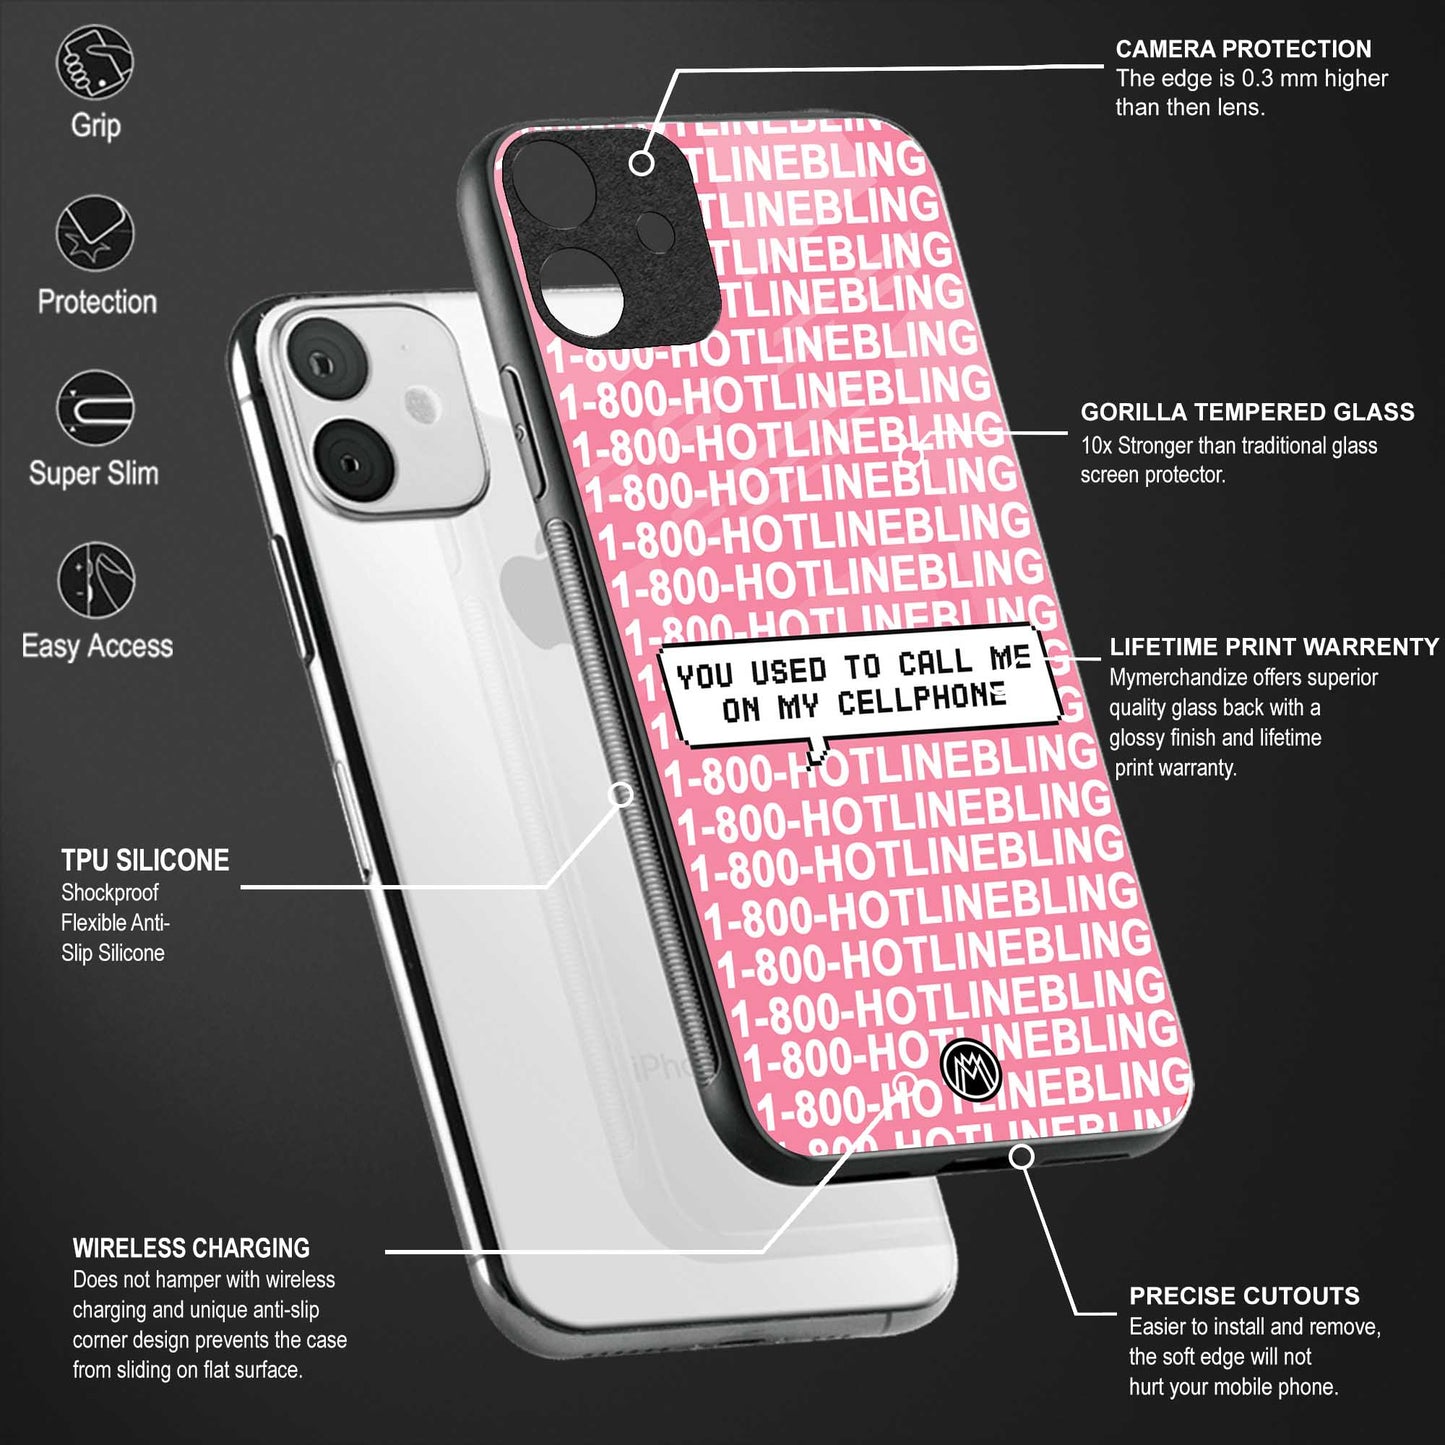 1800 hotline bling phone cover for poco c3 